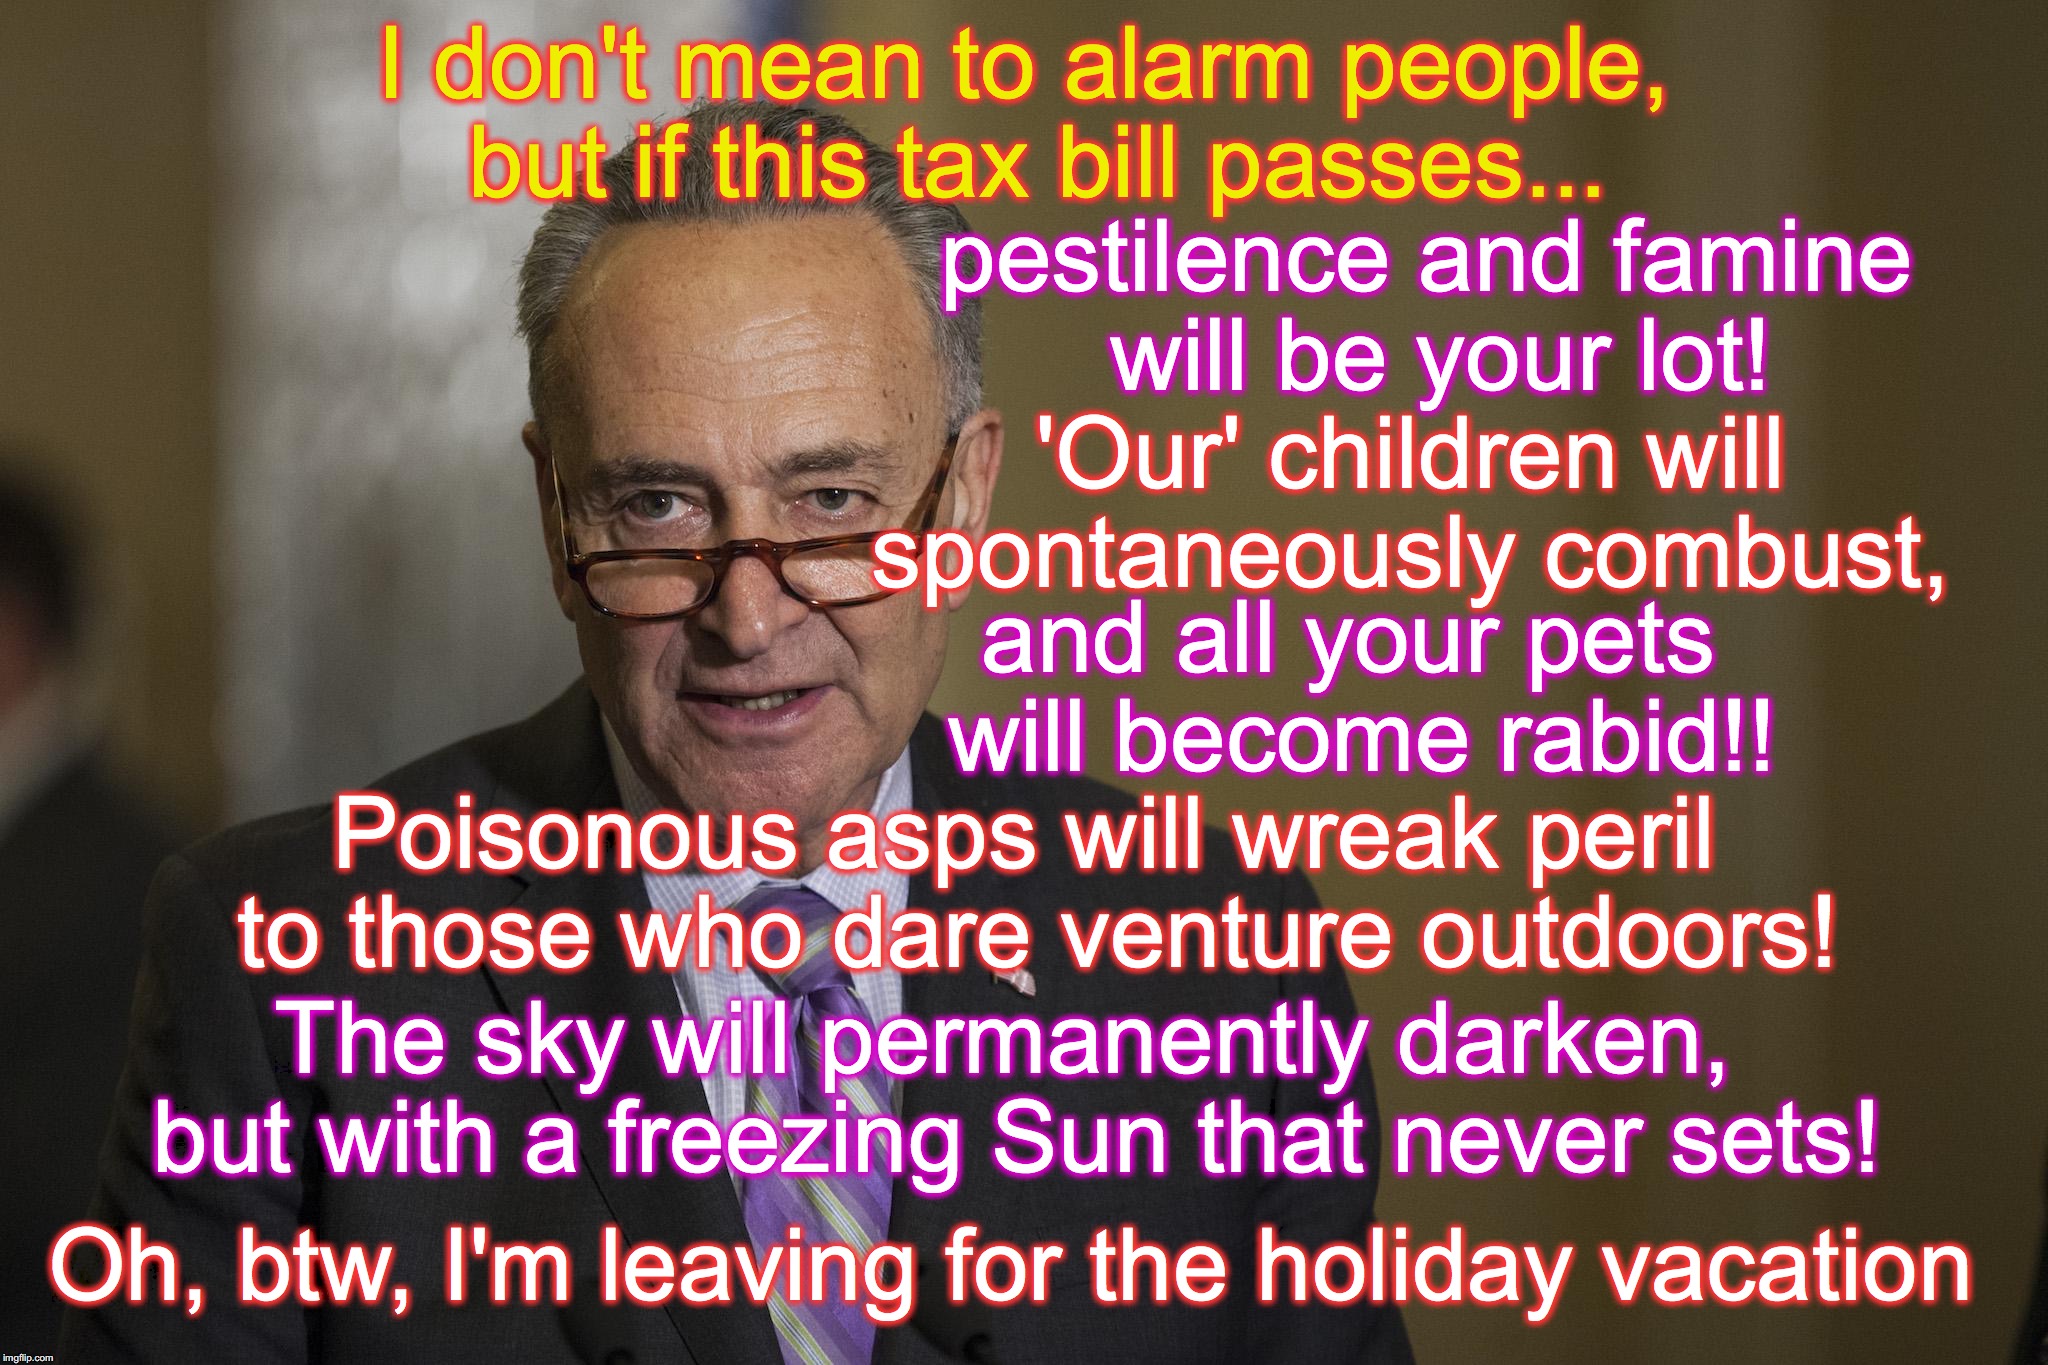 he's still gonna go home for the holidays and enjoy.... | I don't mean to alarm people, but if this tax bill passes... pestilence and famine will be your lot! 'Our' children will spontaneously combust, and all your pets will become rabid!! Poisonous asps will wreak peril to those who dare venture outdoors! The sky will permanently darken, but with a freezing Sun that never sets! Oh, btw, I'm leaving for the holiday vacation | image tagged in chuck schumer,alarm | made w/ Imgflip meme maker